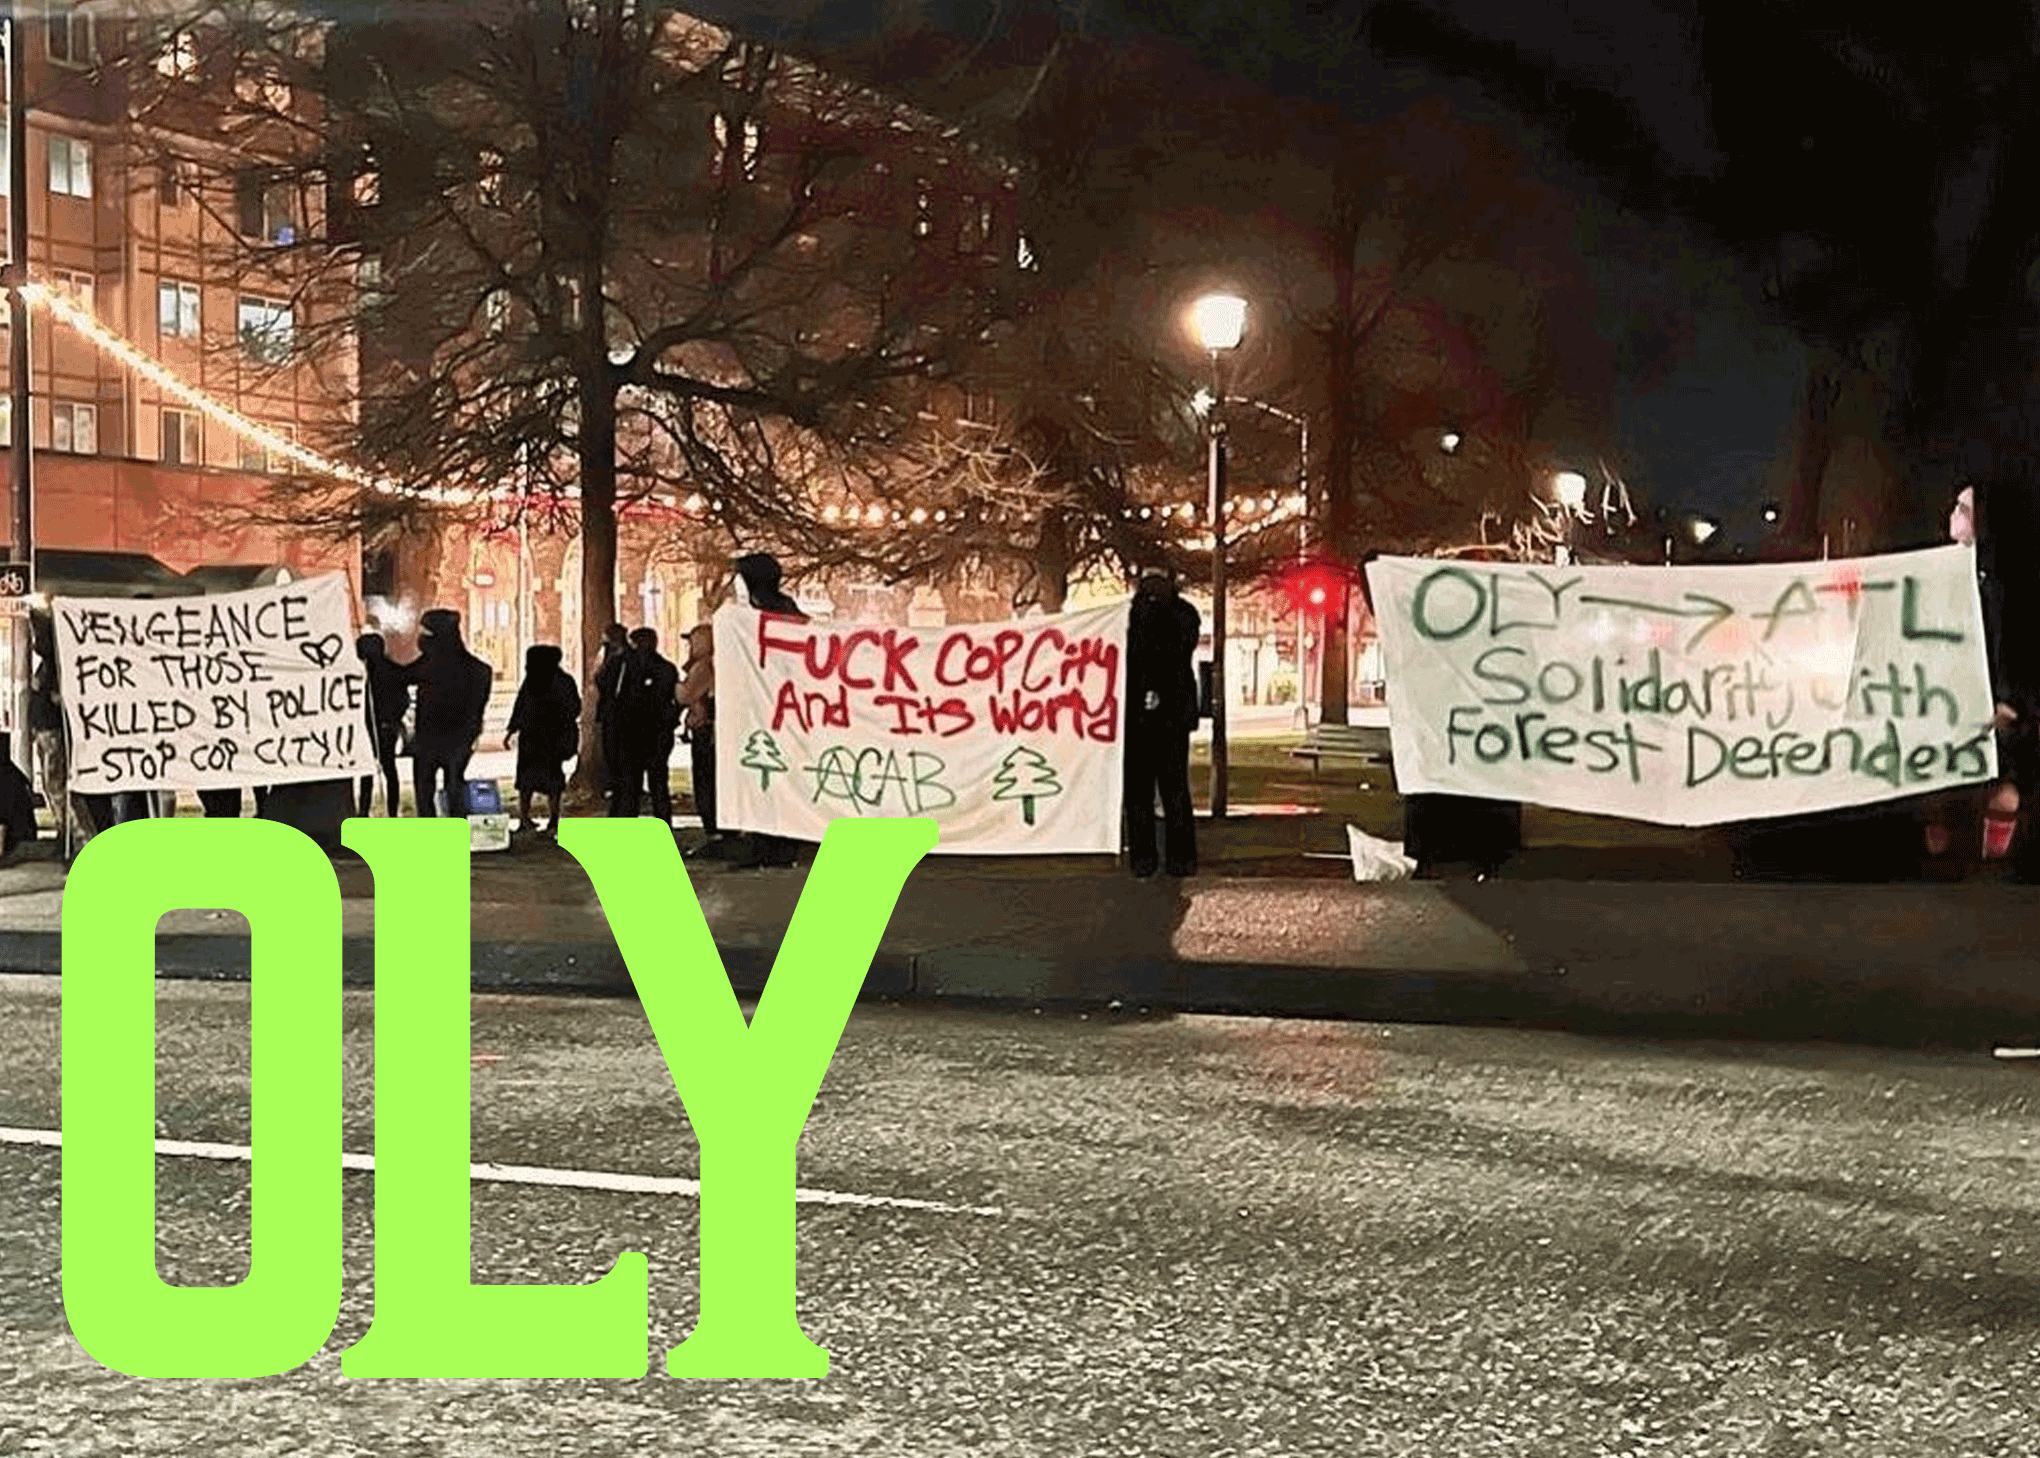 Three white banners are held in front of a street. The first says "VENGEANCE FOR THOSE KILLED BY POLICE - STOP COP CITY!!" and has a black butterfly, all in black. The second spells out "FUCK COP CITY AND ITS WORLD" in red text with two green trees and "ACAB" at the bottom. The A in "ACAB" is an anarchist circle-A synbol. The third and final banner states "OLY (arrow) ATL Solidarity with Forest Defenders" in green text.In the bottom left corners, "OLY" is spelled in green letters.